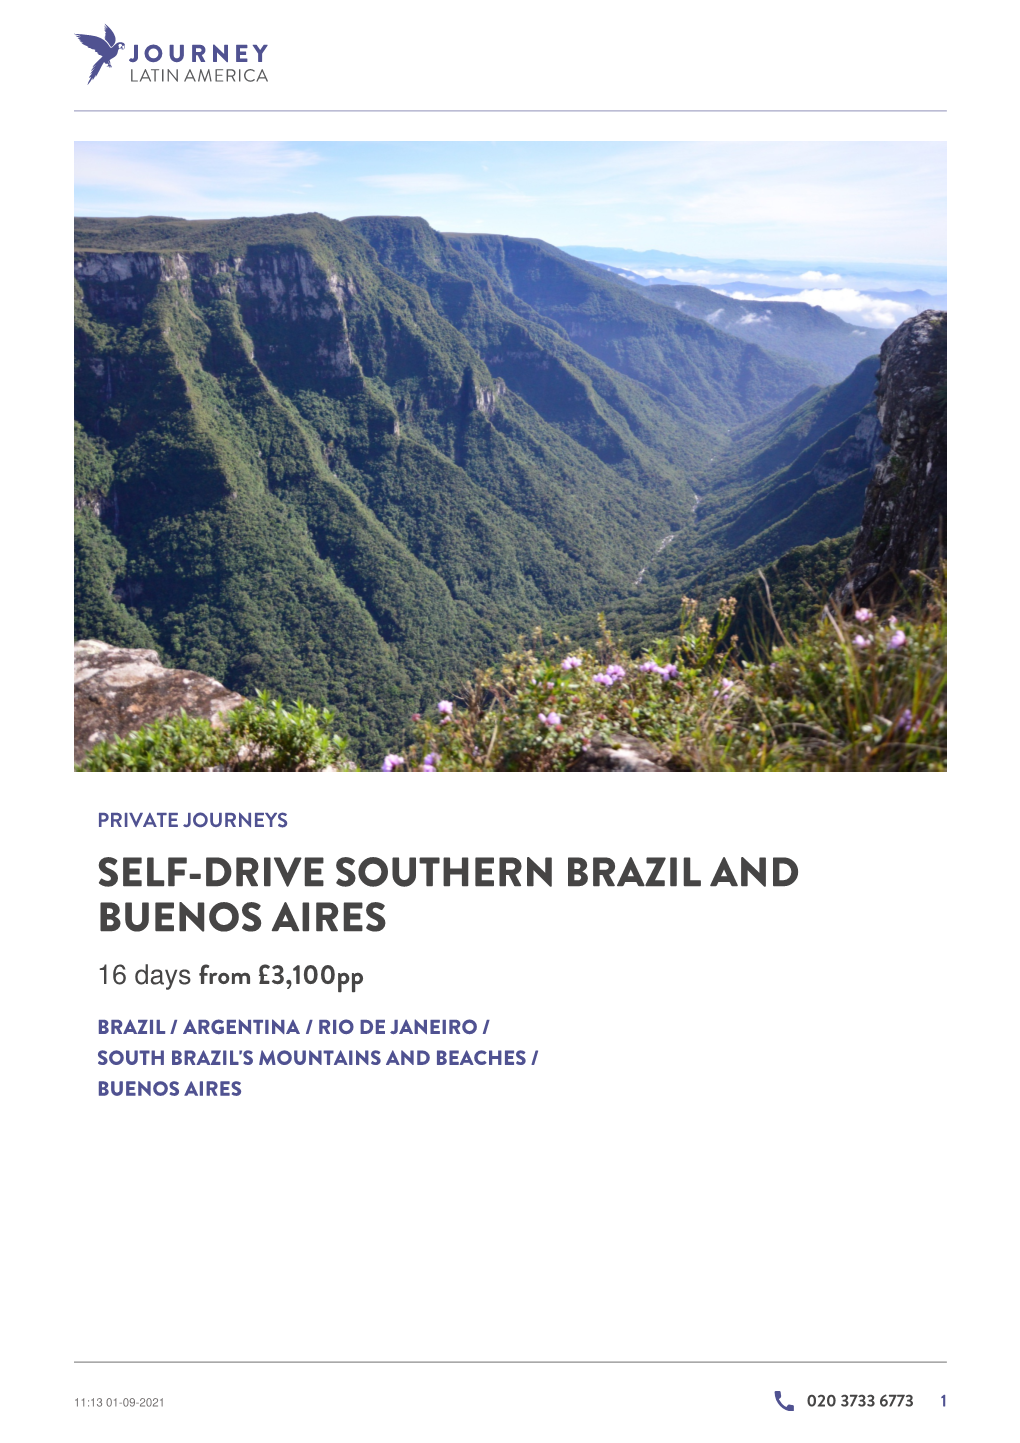 Self-Drive Southern Brazil and Buenos Aires